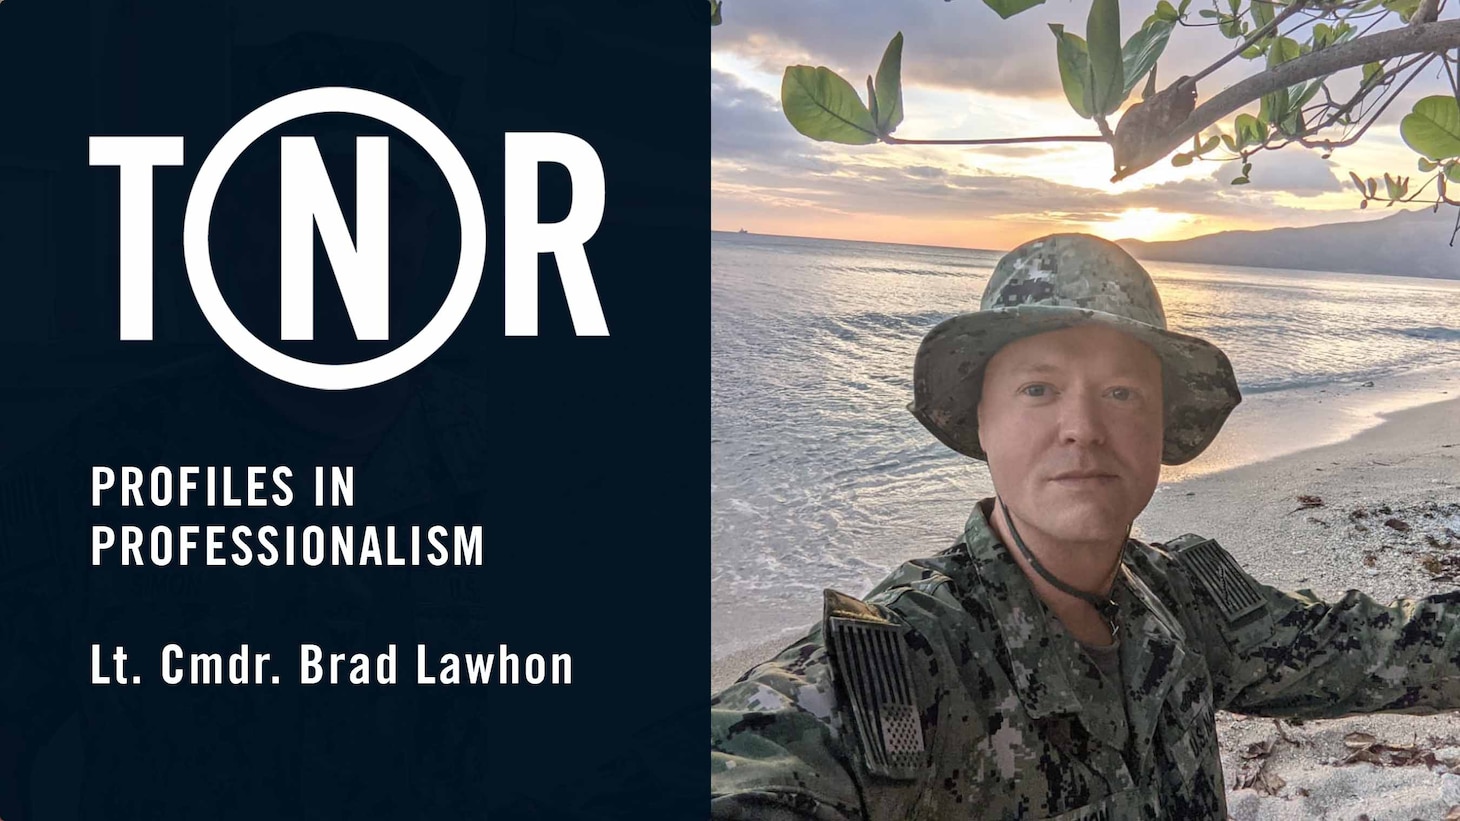 Lt. Cmdr. Brad Lawhon has lived overseas or been stationed aboard ships, both commercial and USNS, for the last seven years.

“I have coined the phrase ‘successfully homeless,’ as I have not been able to call anywhere home,” he said.